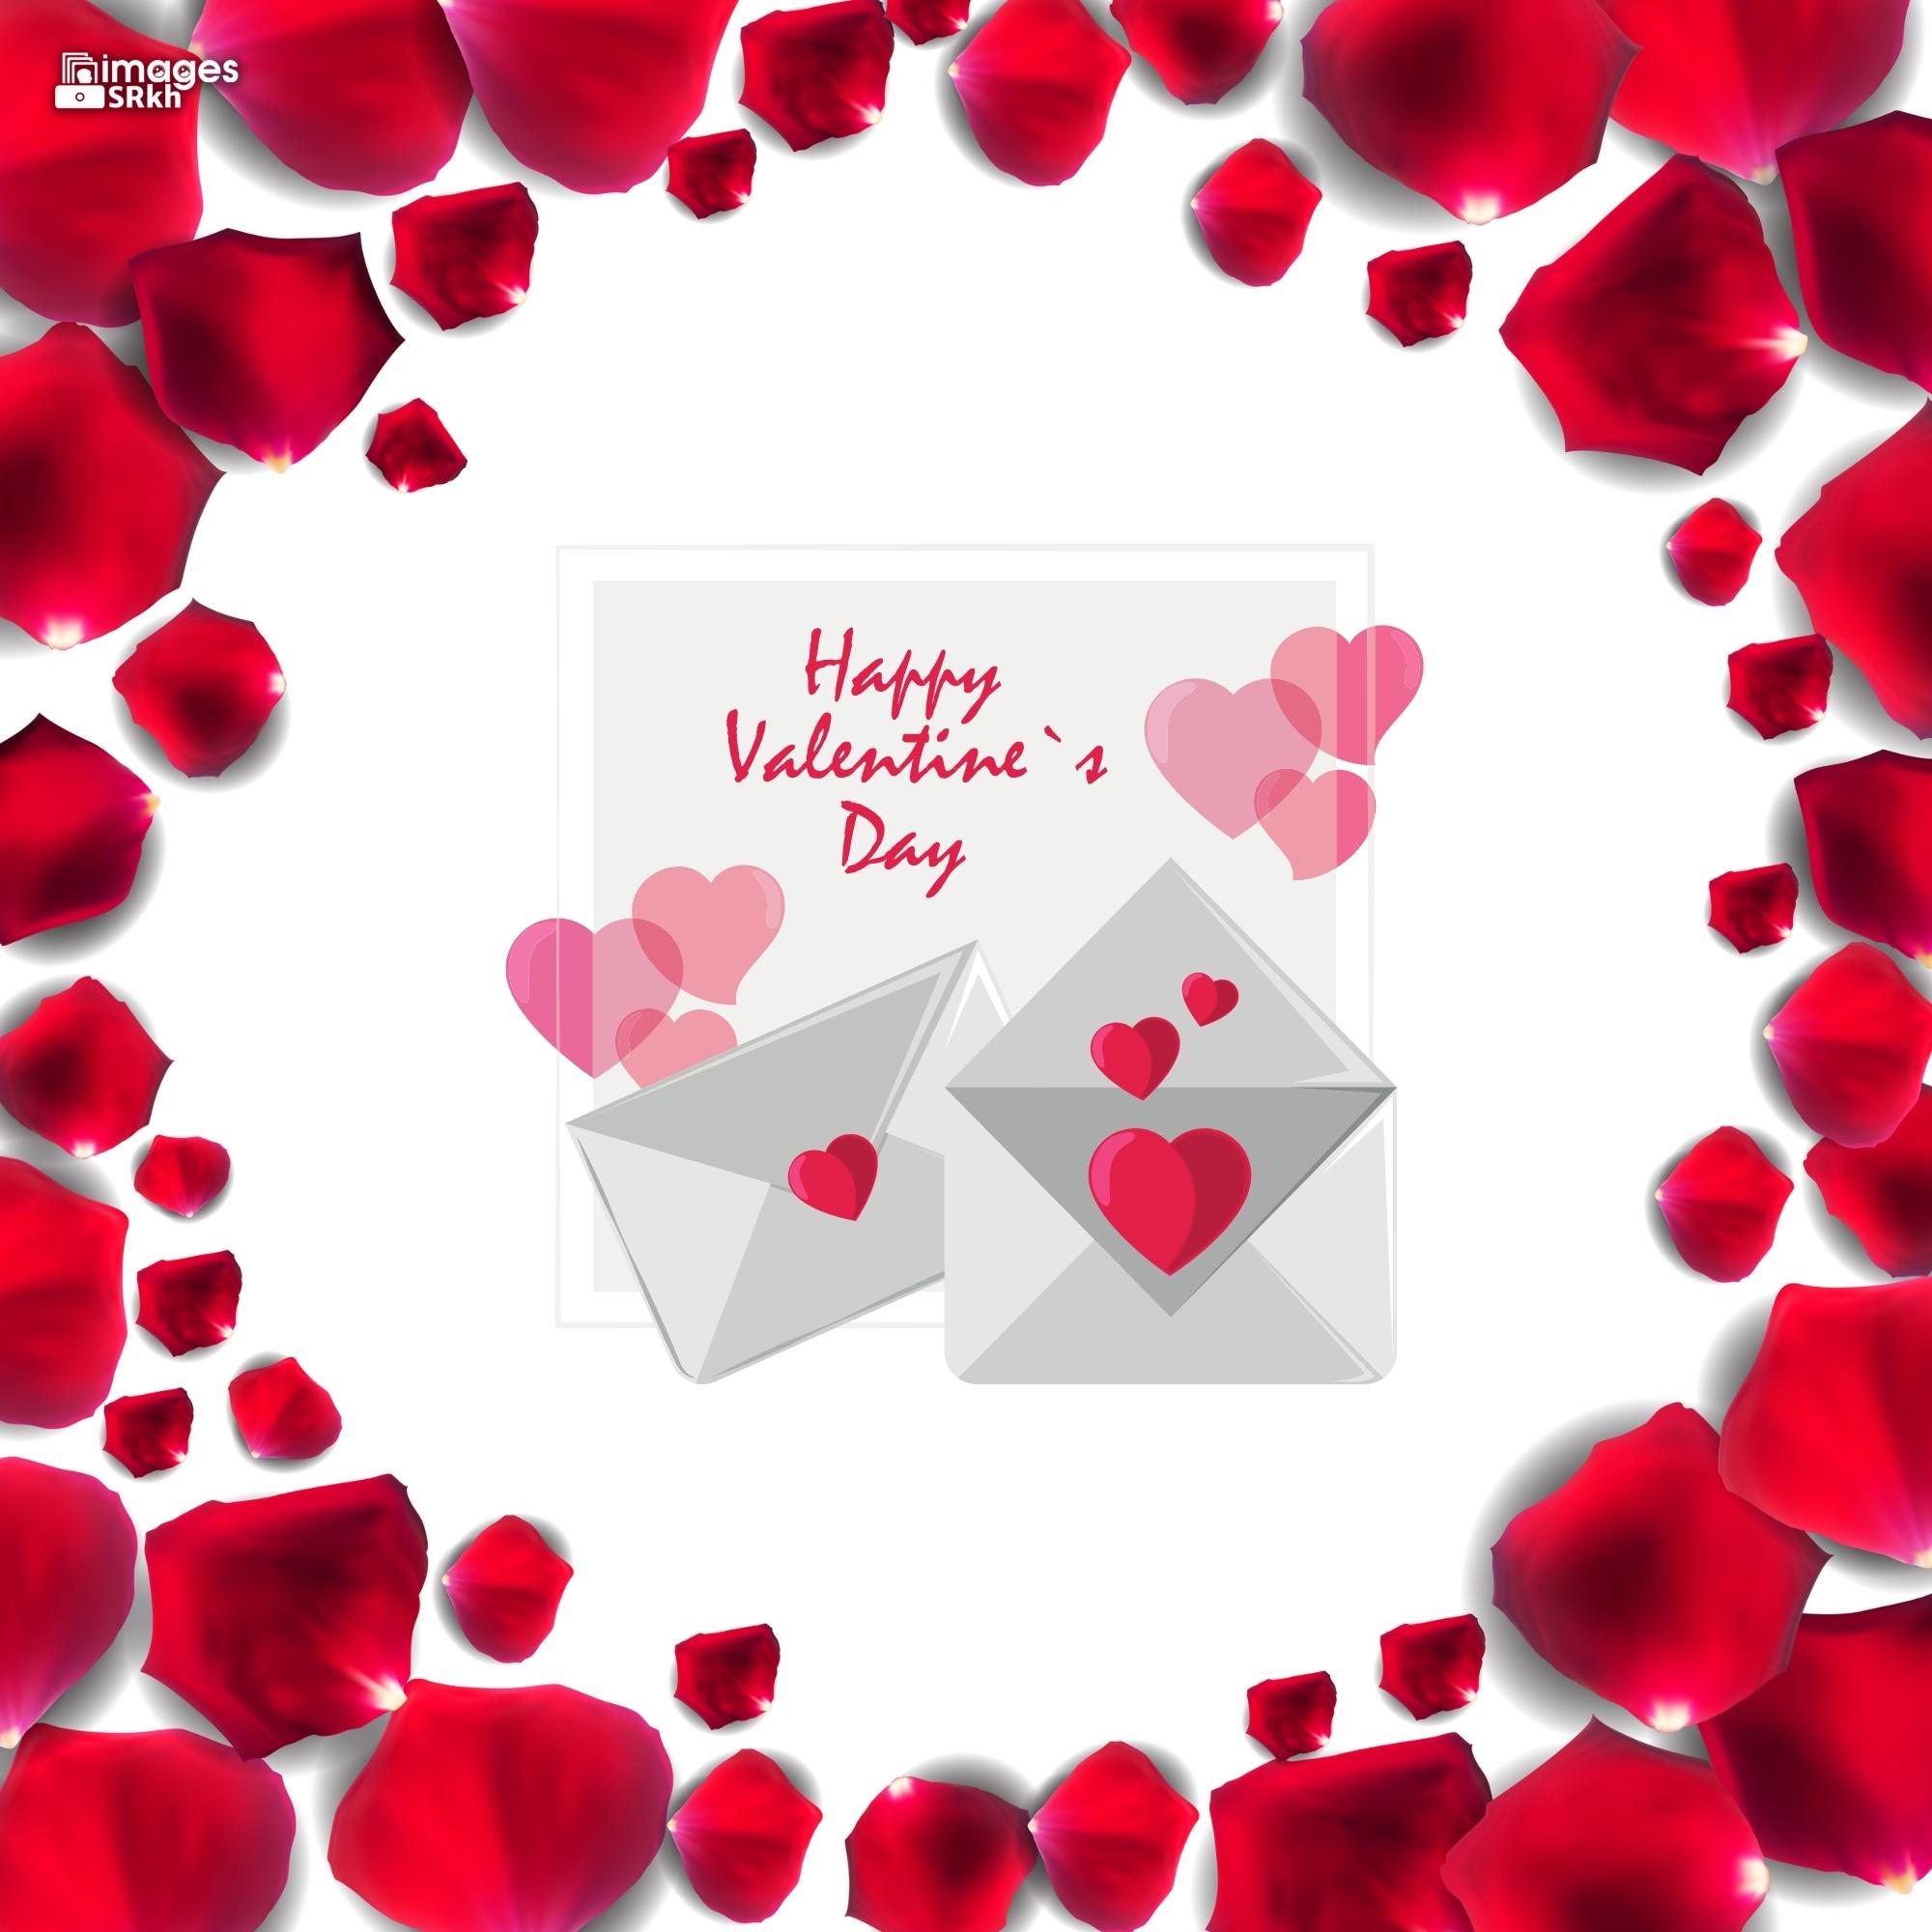 Happy Valentines Day | 461 | PREMIUM IMAGES | Wishes for Love